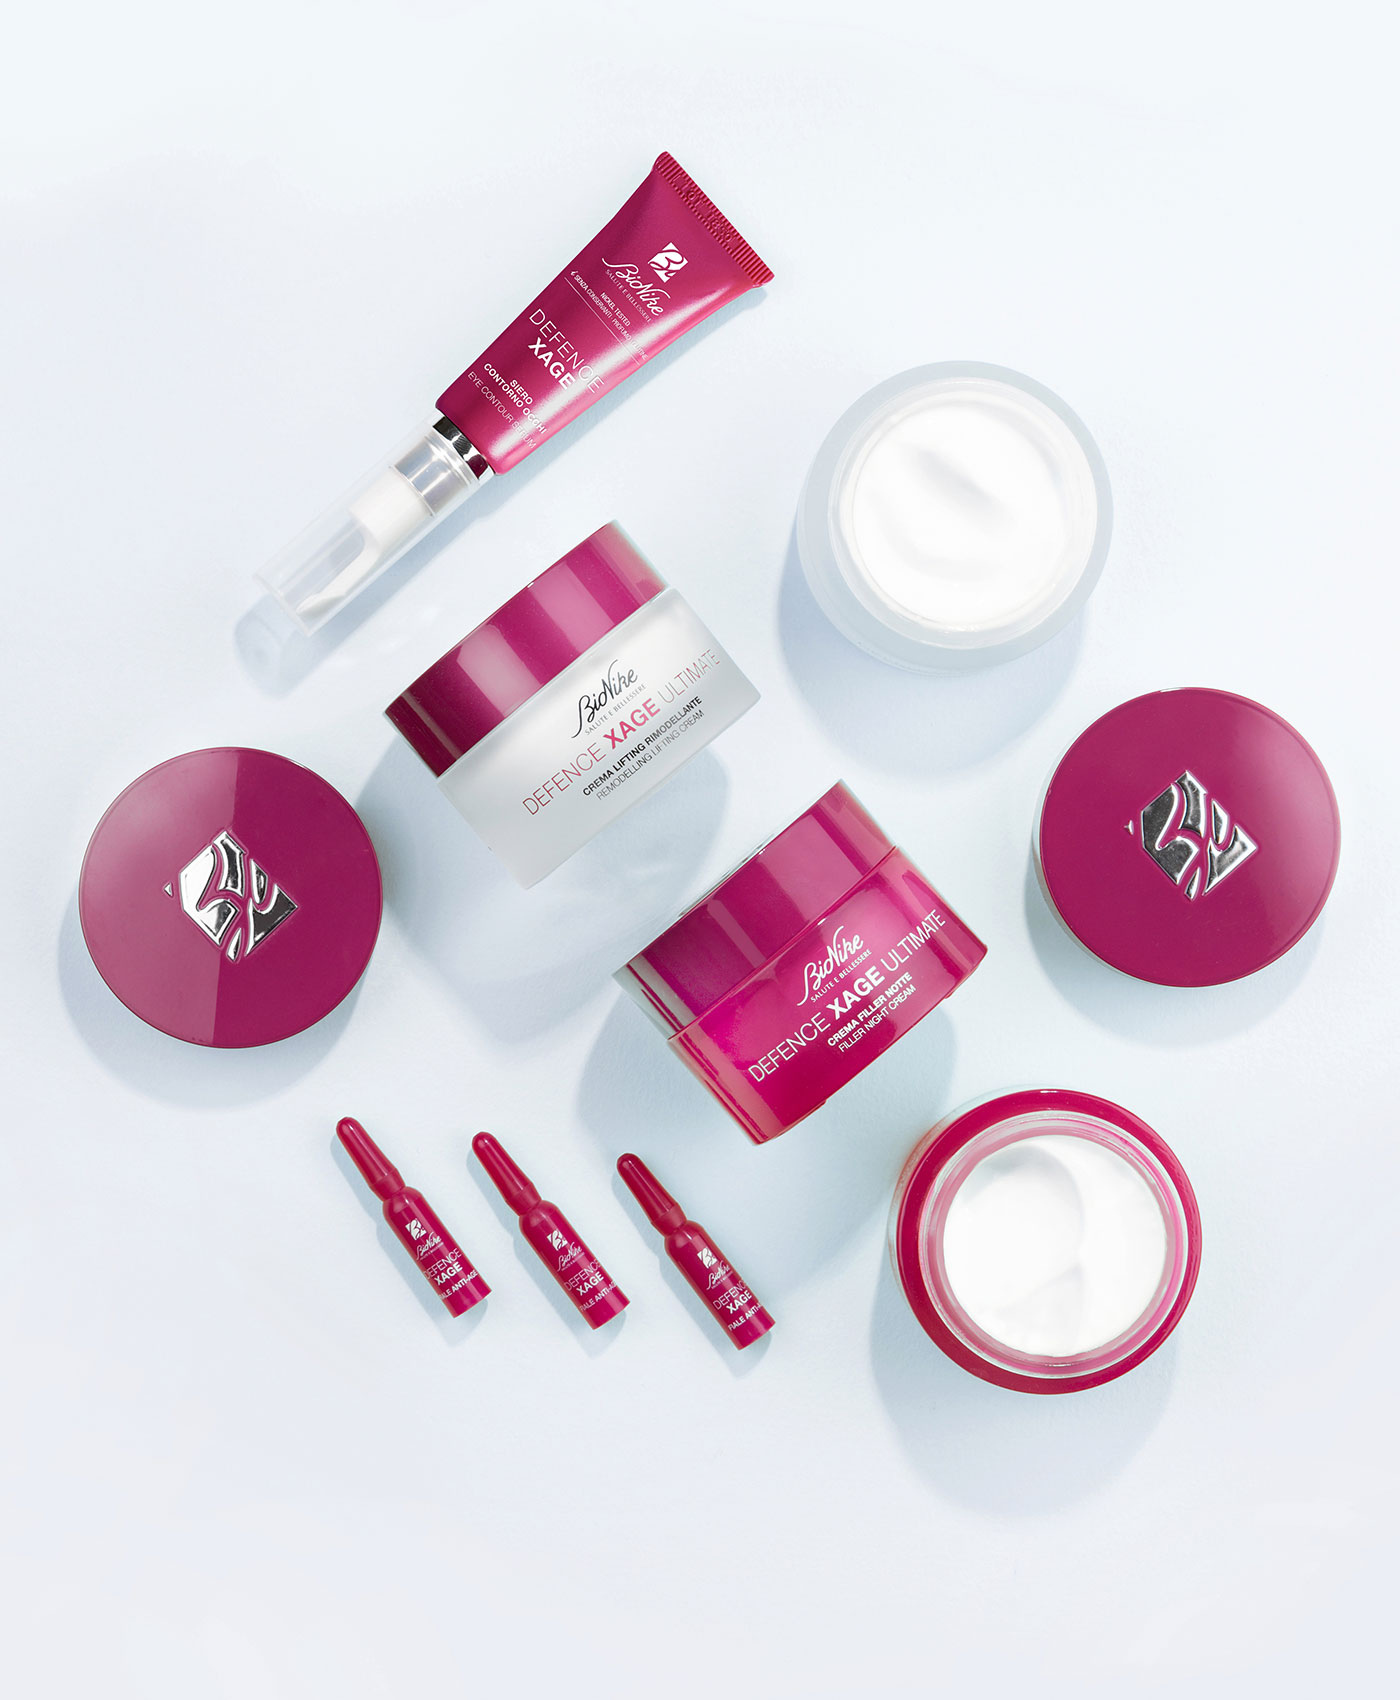 PRIME Revitalising Smoothing Balm - BioNike - Sito Ufficiale